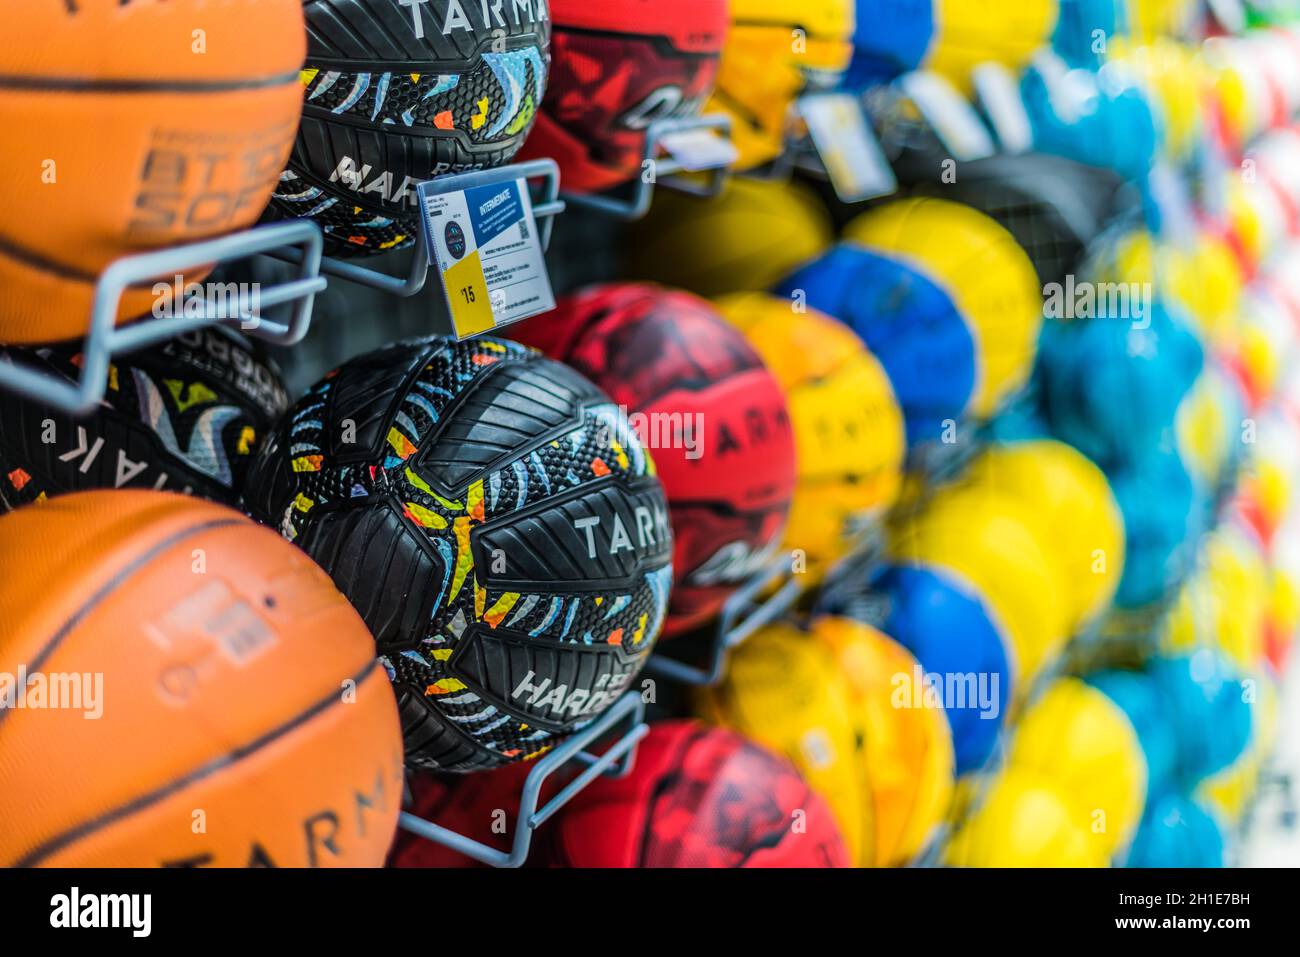 SINGAPORE - MAR 6, 2020: Tarmak basketballs put up for sale in the Decathlon  store in Singapore Stock Photo - Alamy